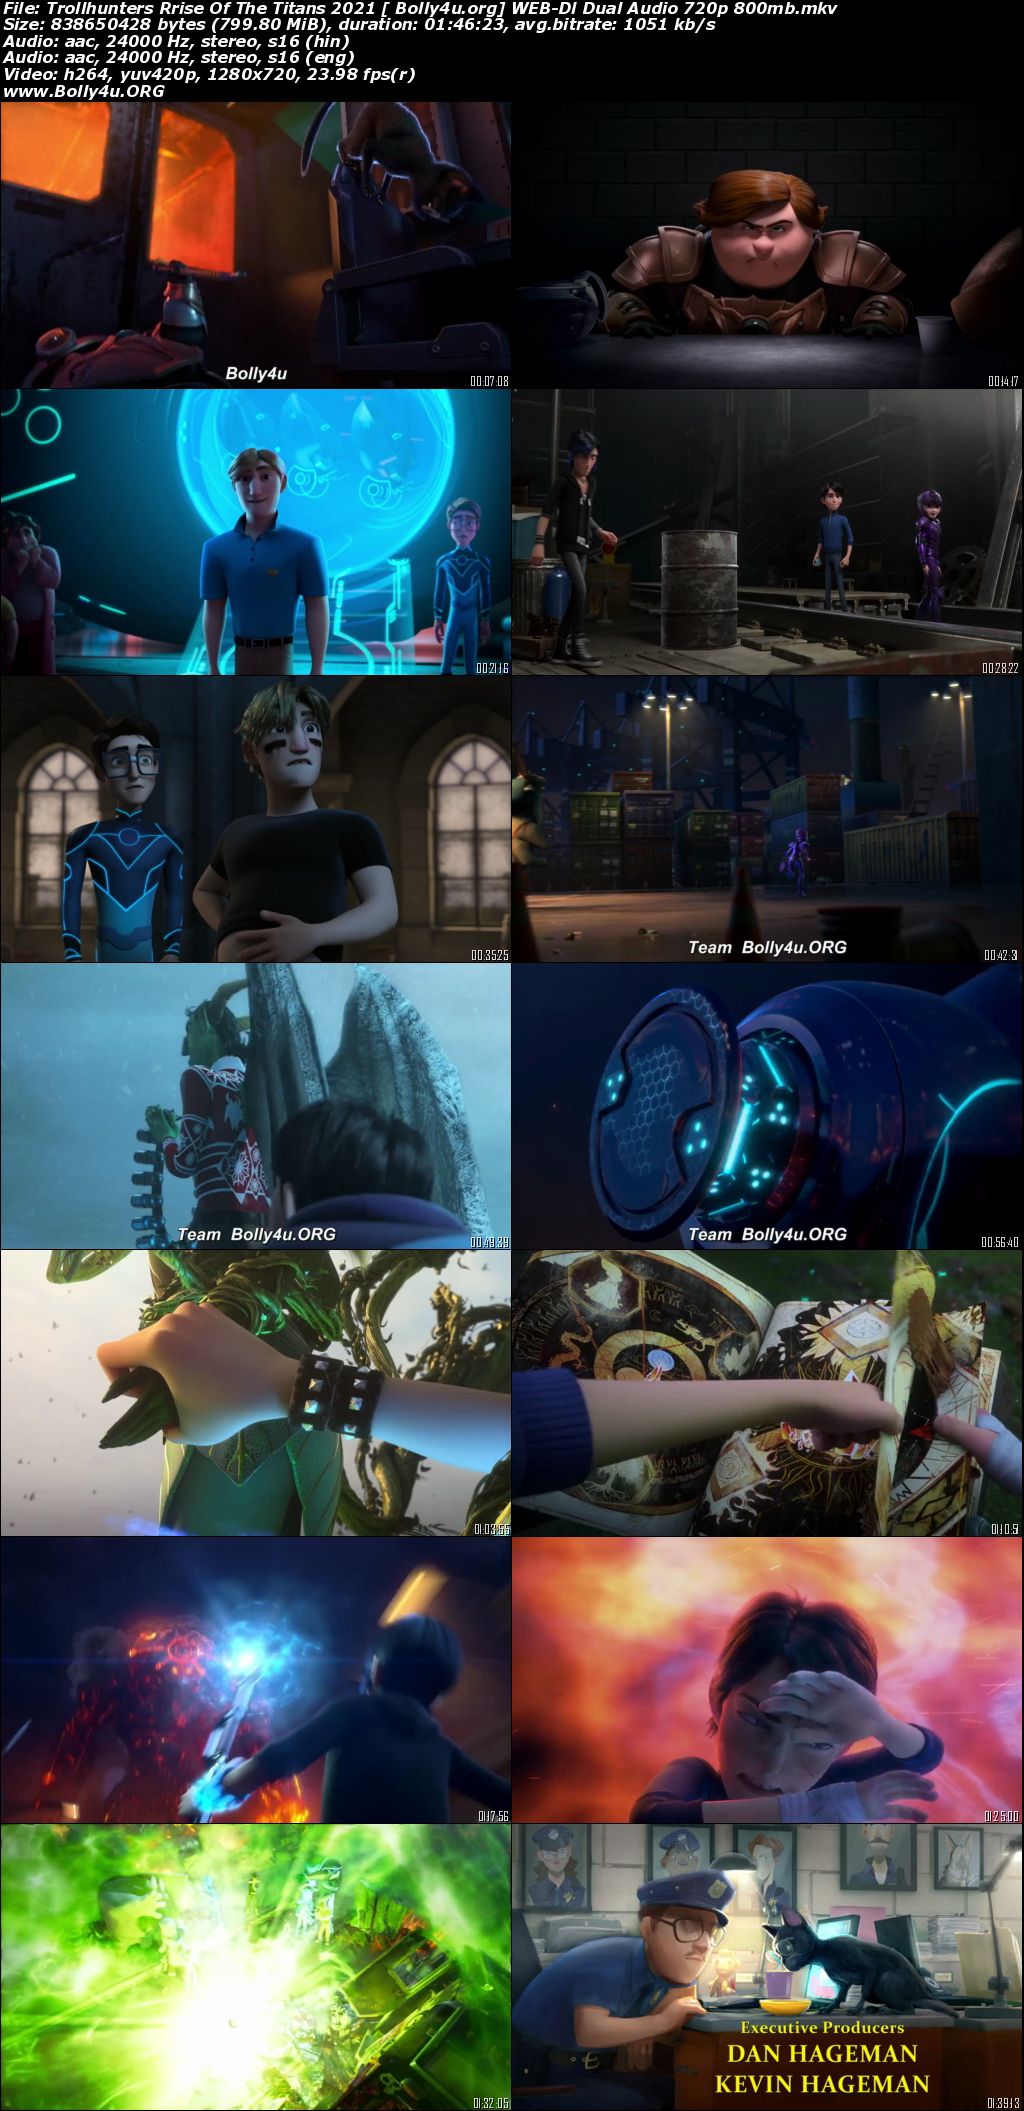 Trollhunters Rrise Of The Titans 2021 WEB-DL 800Mb Hindi Dual Audio ORG 720p Download